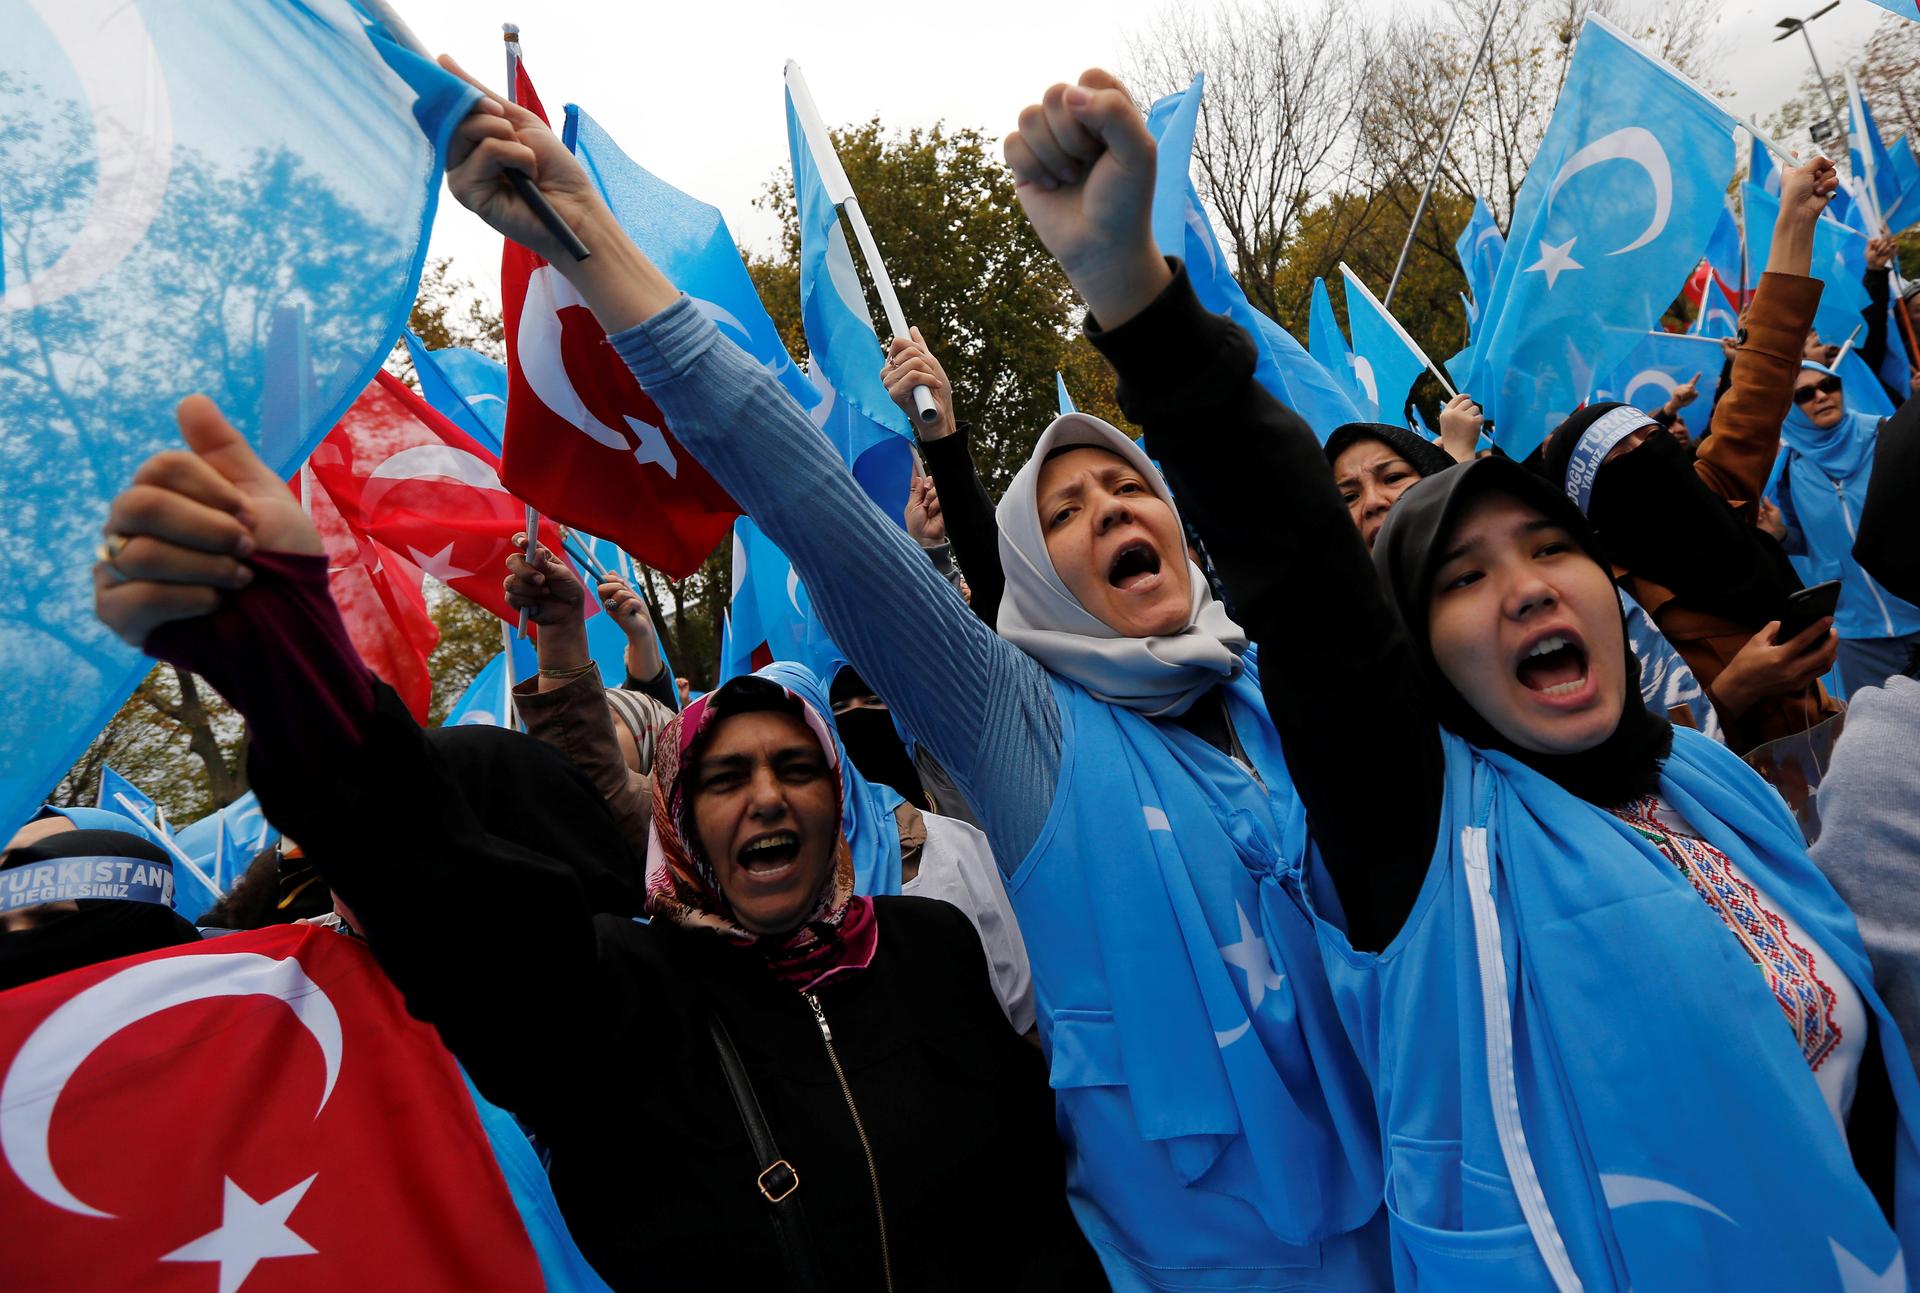 Demonstrators wave Turkish and East Turkestan flags as they shout slogans during a protest against China, in Istanbul, Turkey November 6, 2018.